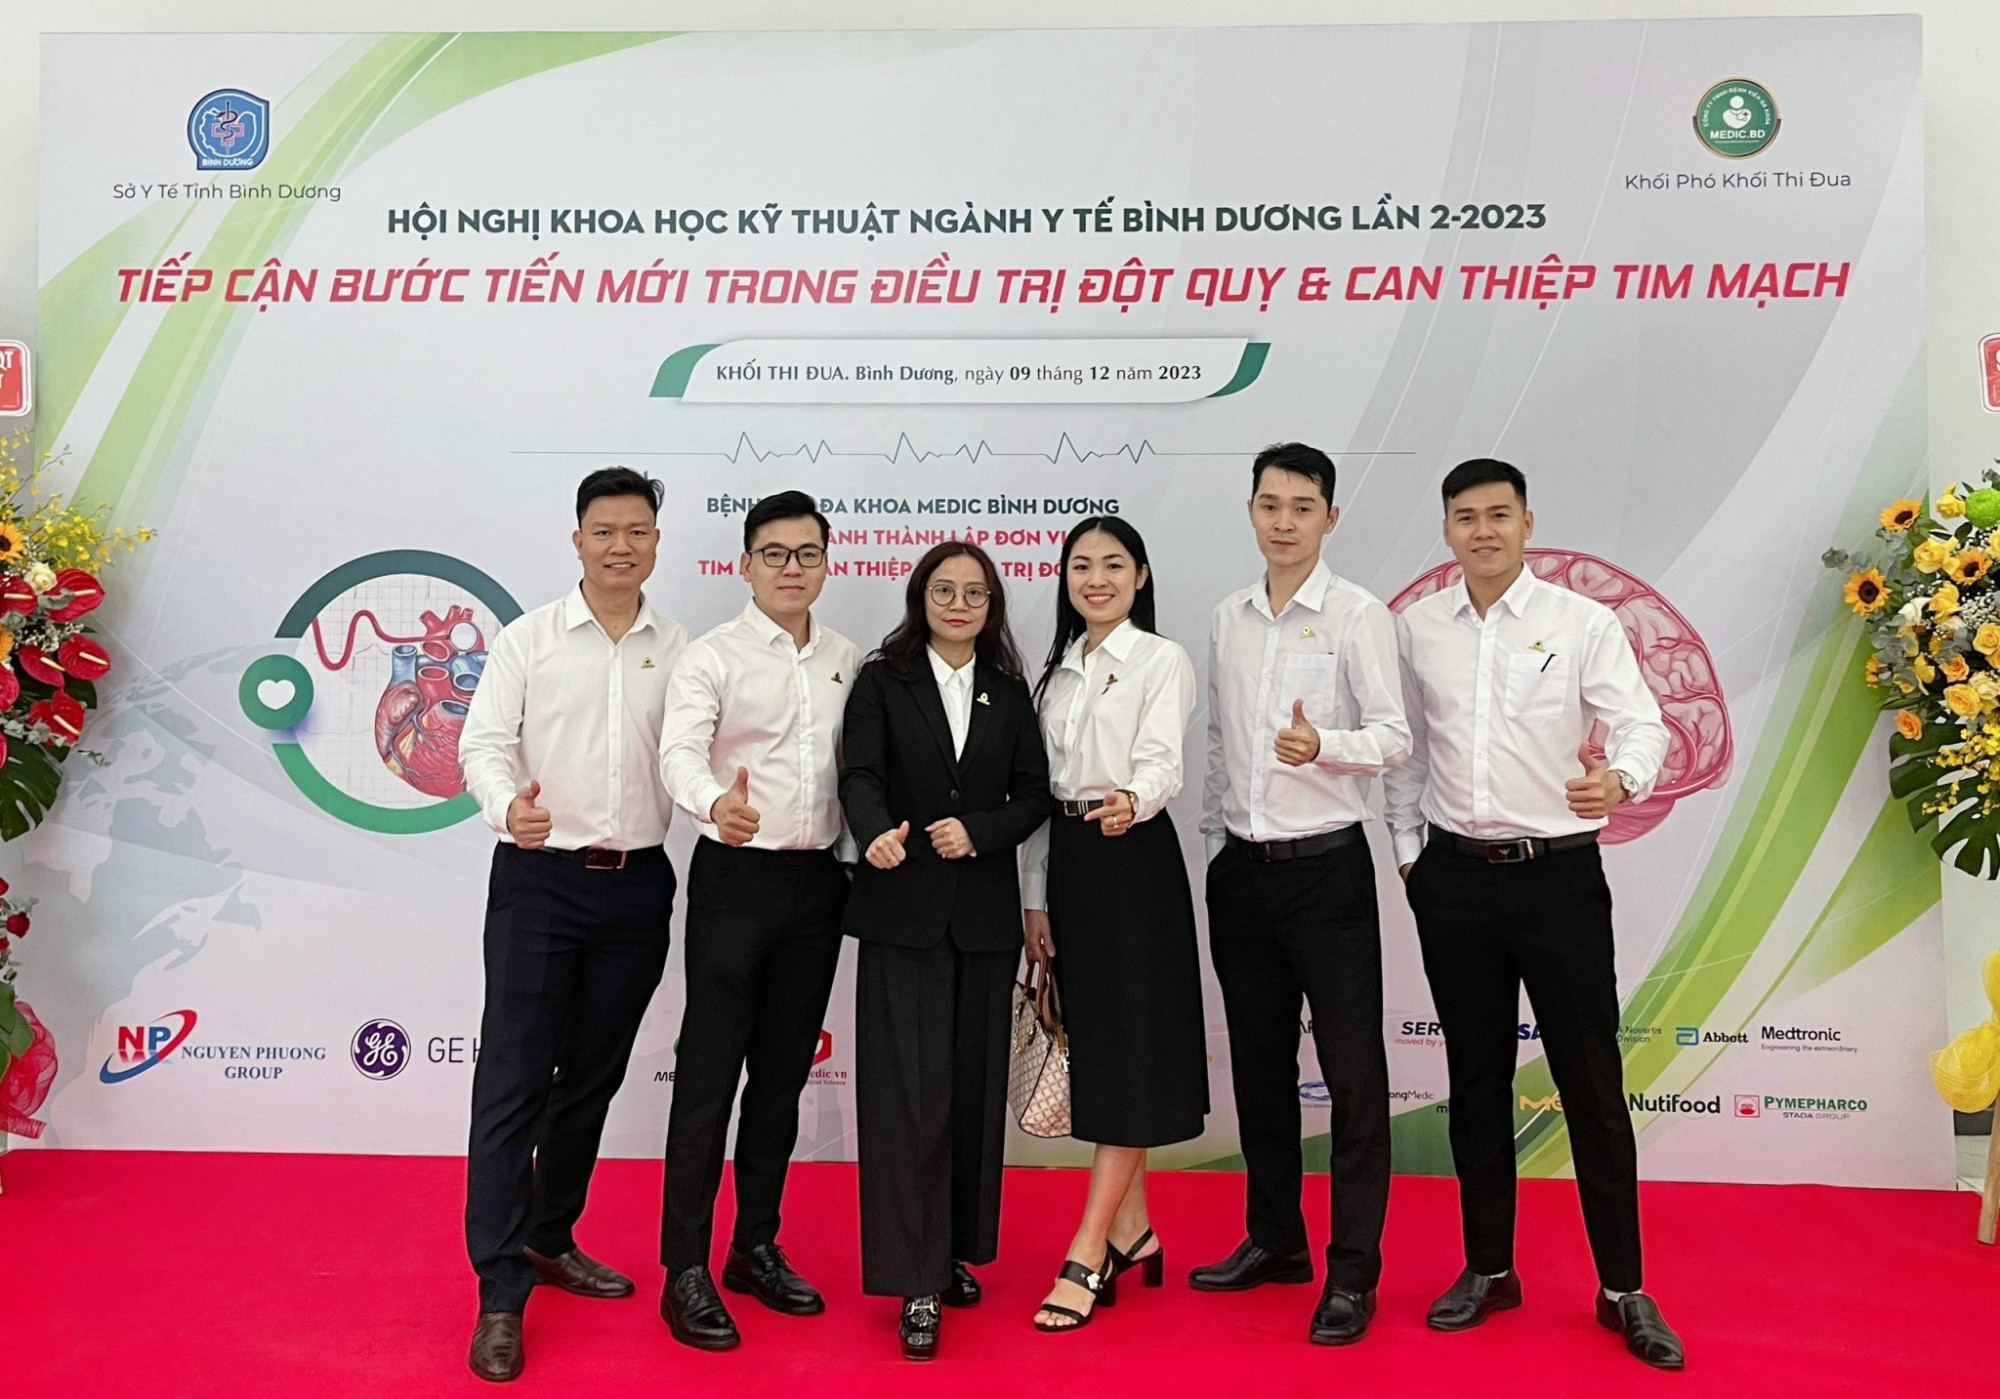 2ND SCIENTIFIC AND TECHNICAL CONFERENCE OF BINH DUONG HEALTH INDUSTRY COMPETITION BLOCK 2023